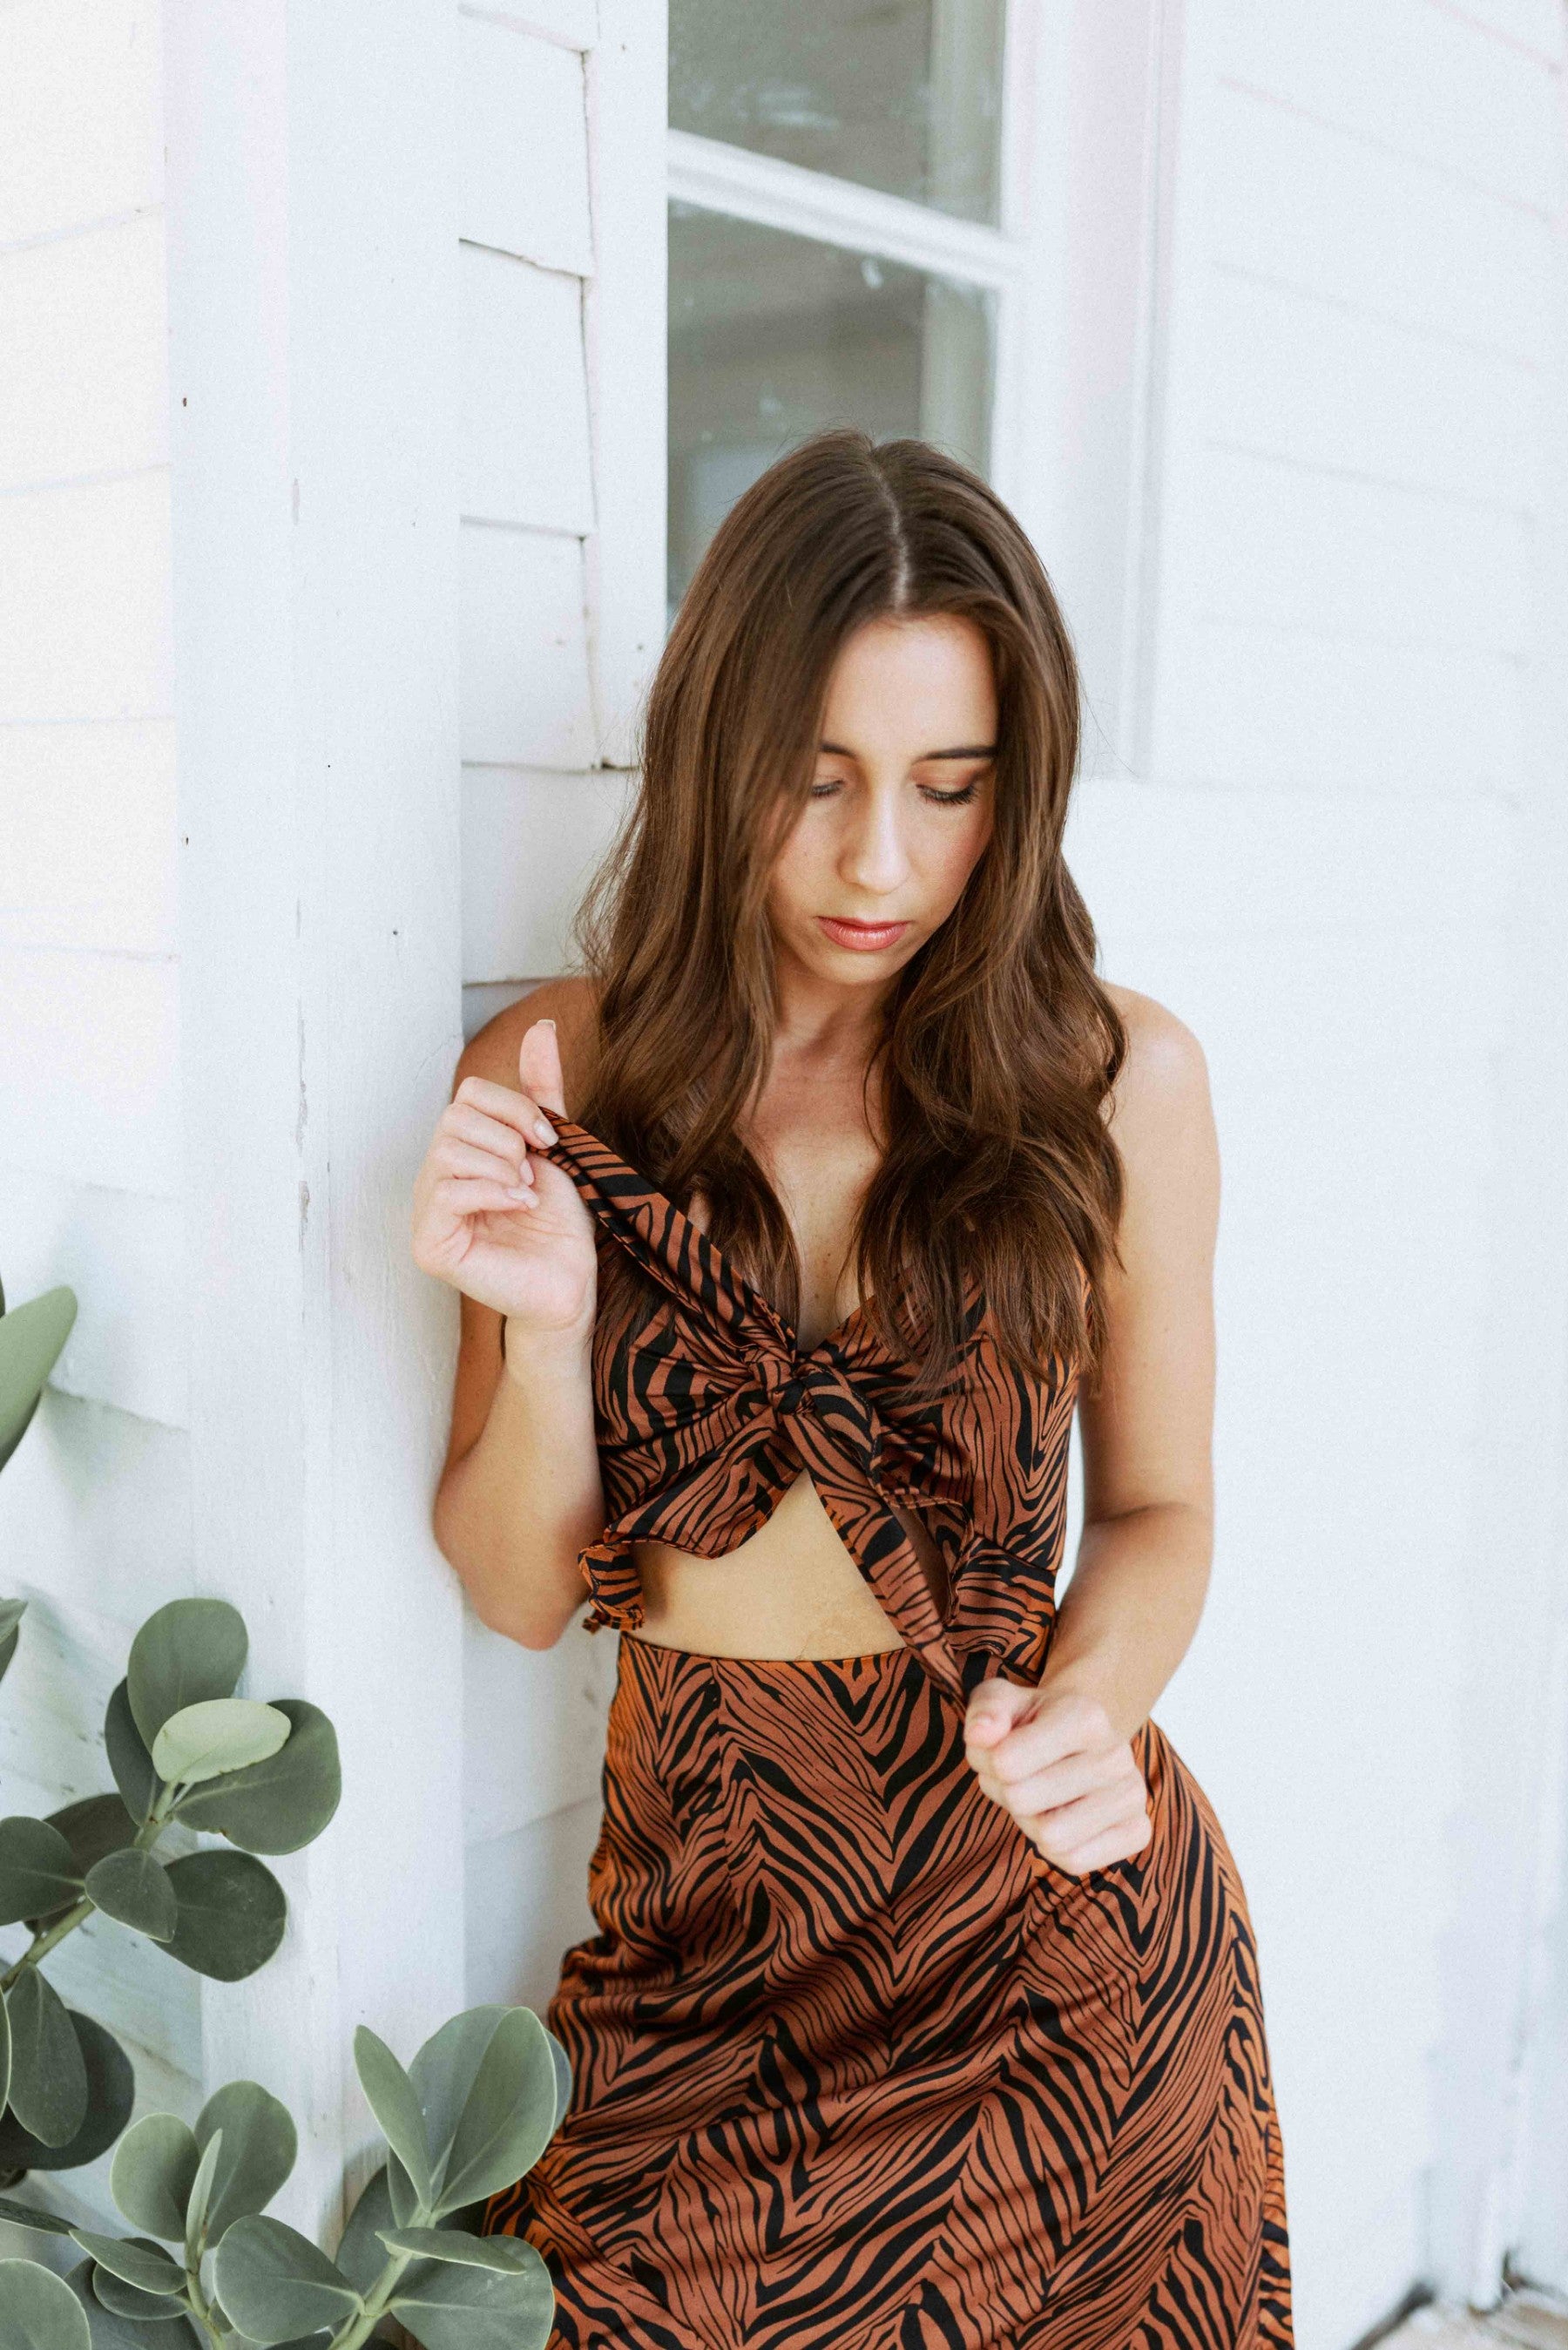 Brunette girl models an animal print maxi skirt set in brown and black. The matching maxi skirt set comes with a spaghetti strap crop top and long, flowy maxi skirt.